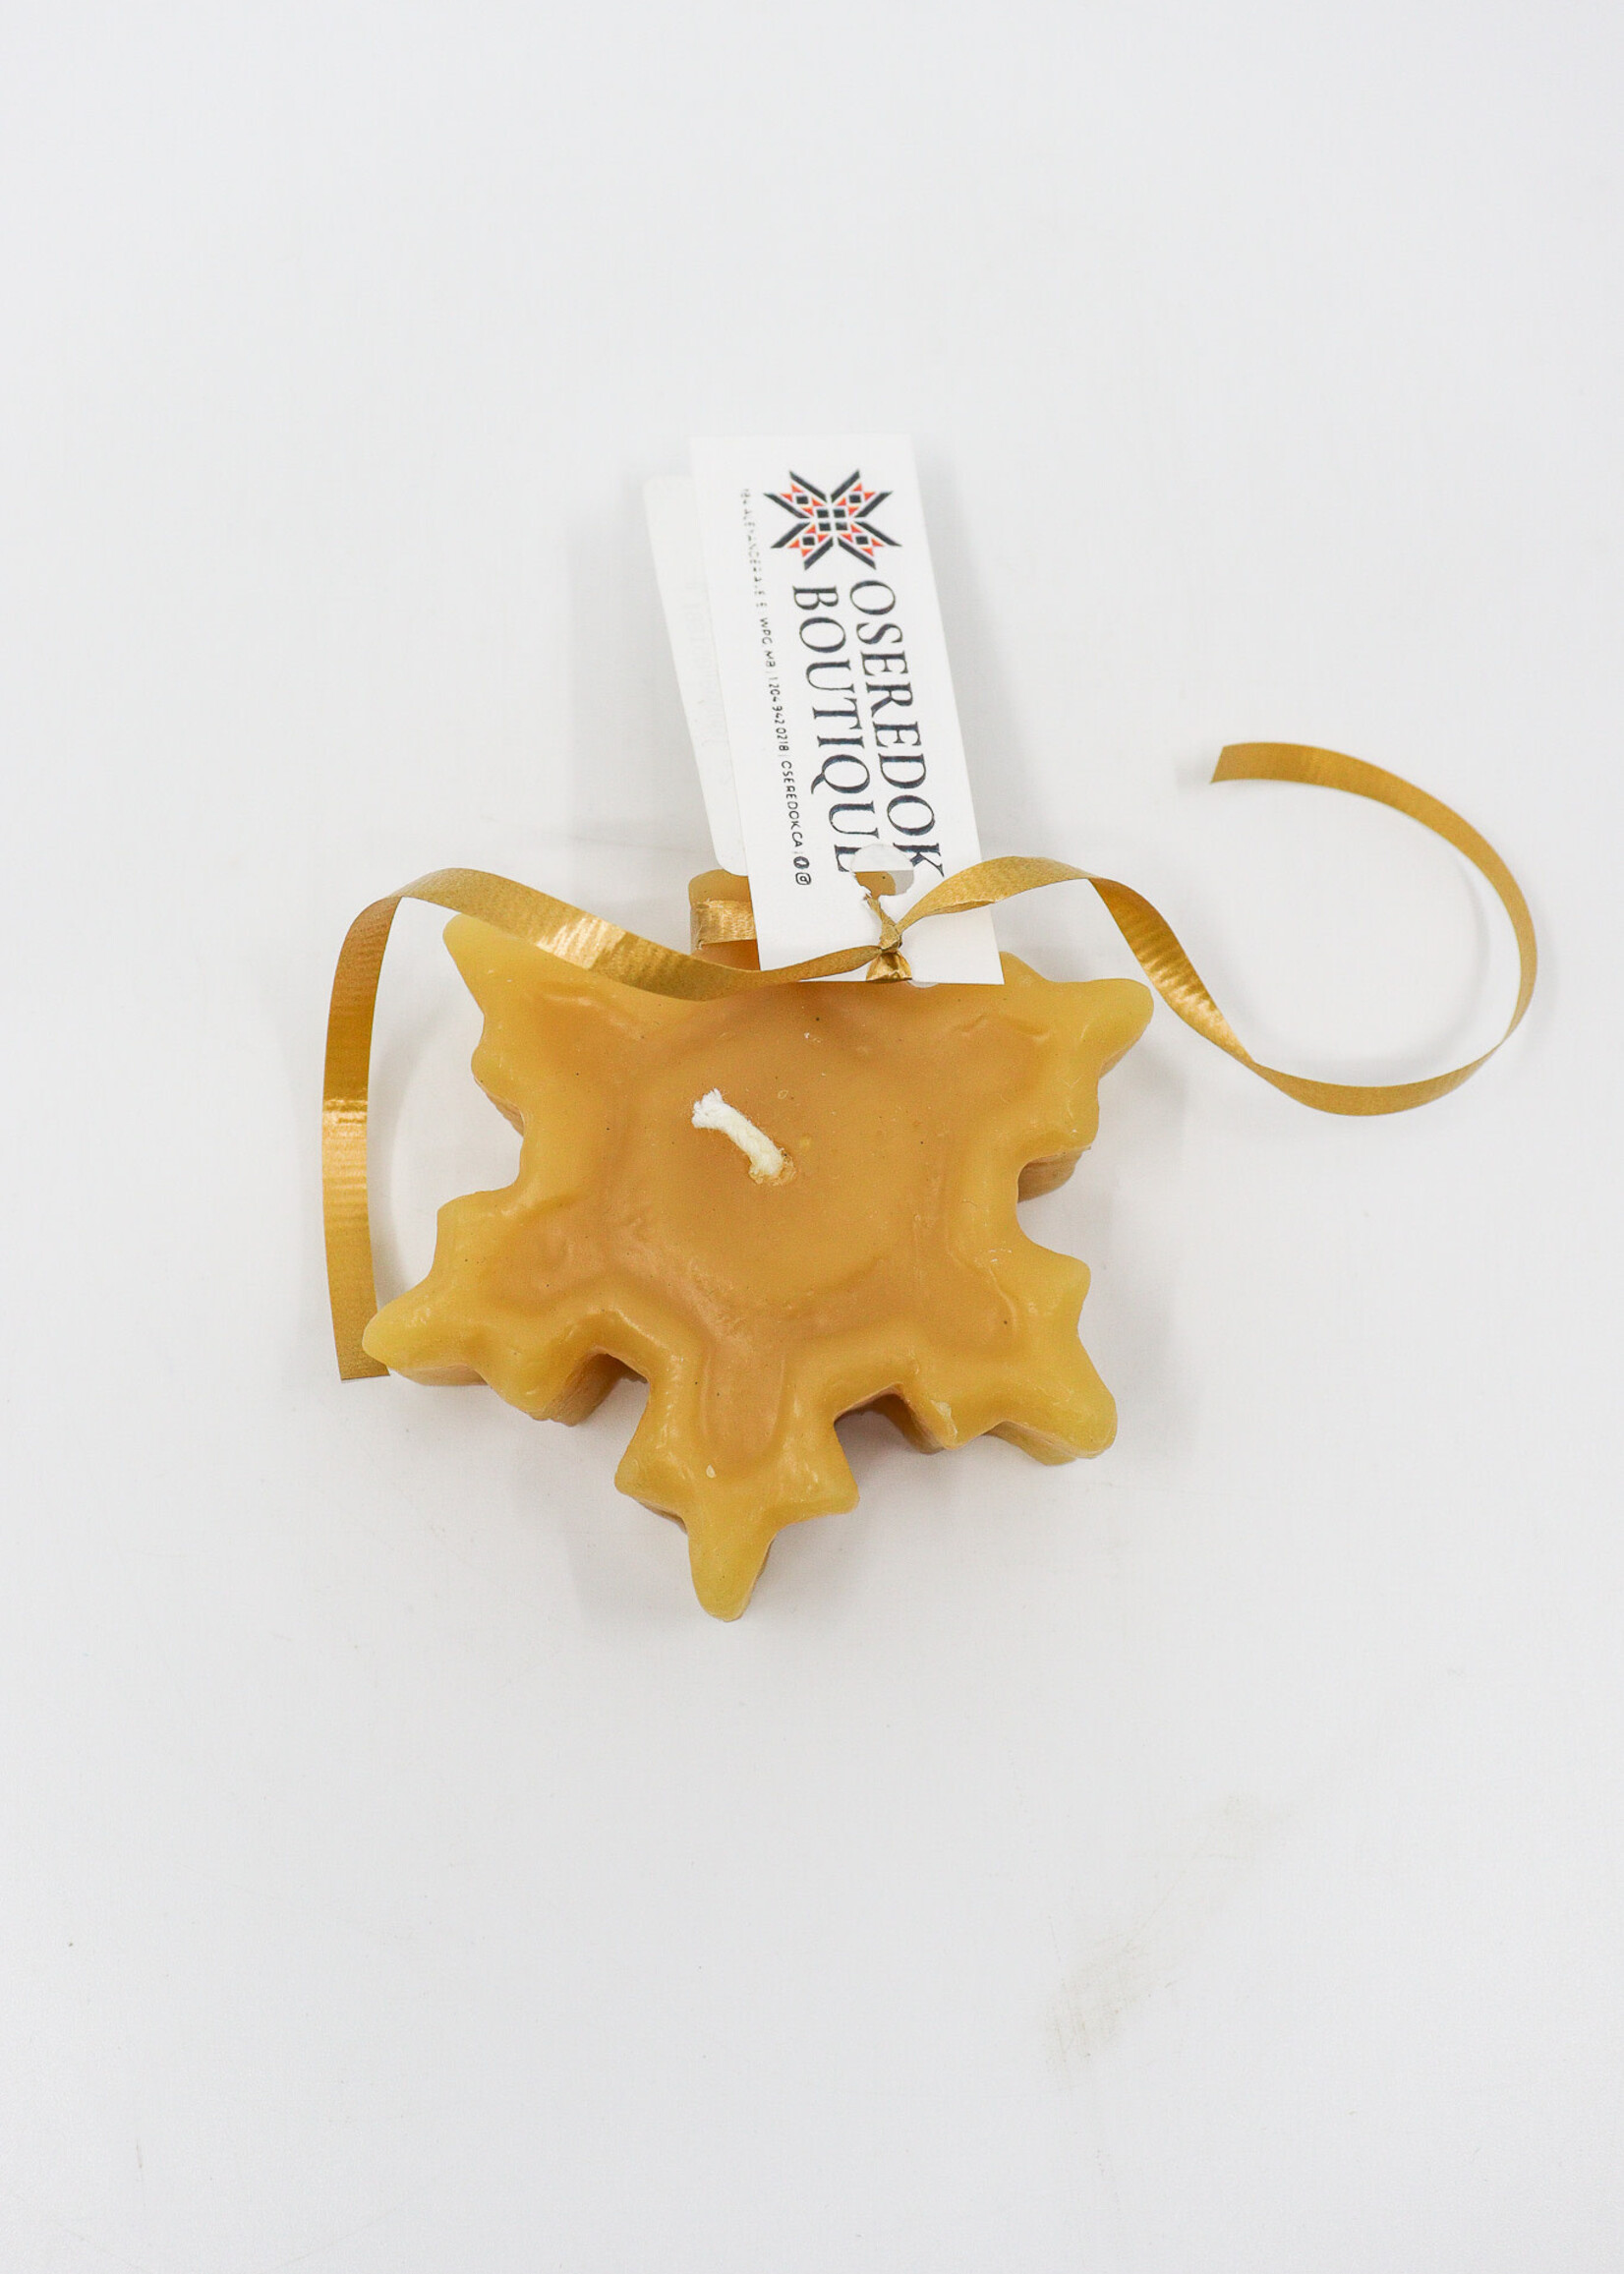 HOME - Snowflake, Honey & Beeswax Candles by Wild River